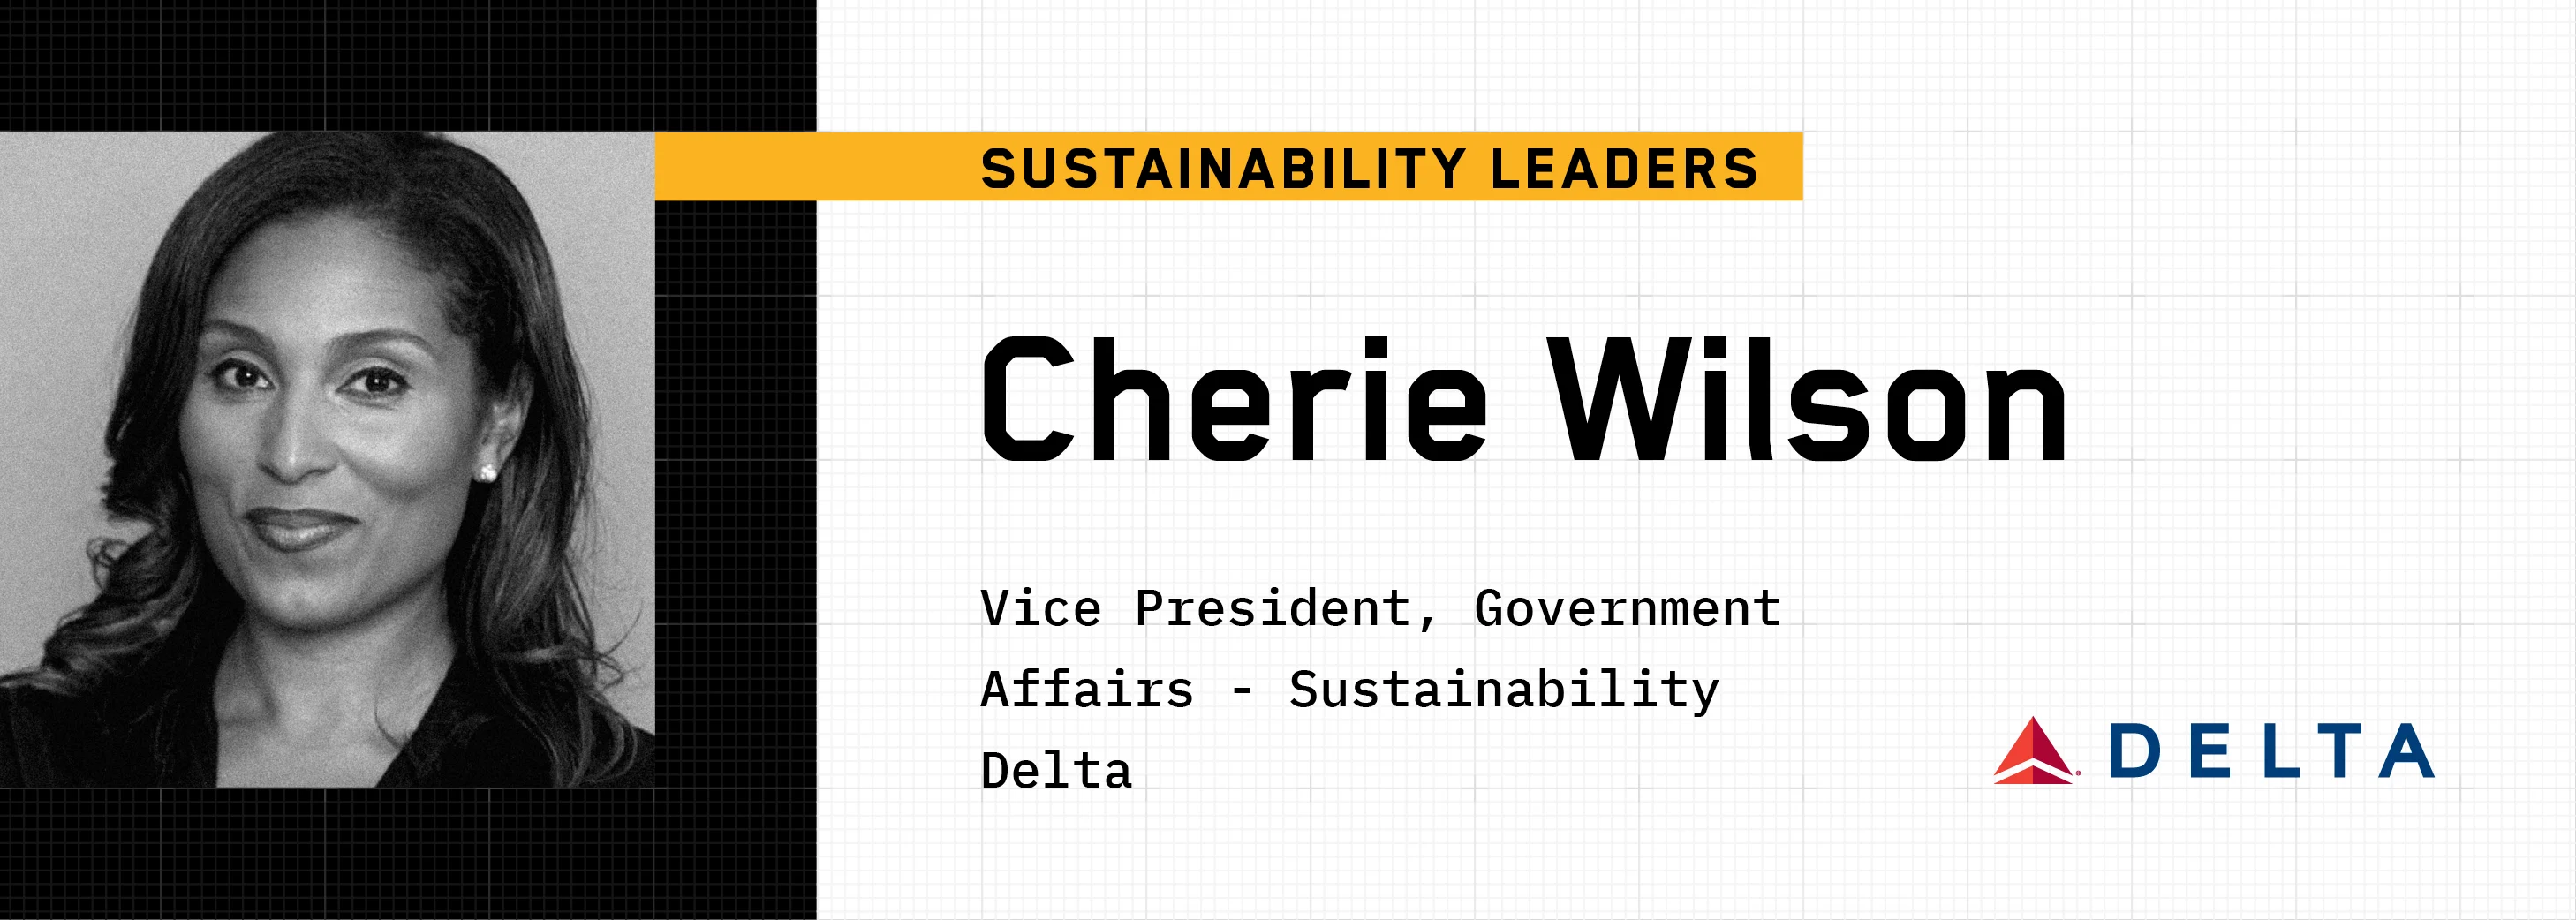 Cherie Wilson, Vice President of Government Affairs - Sustainability, Delta Airlines